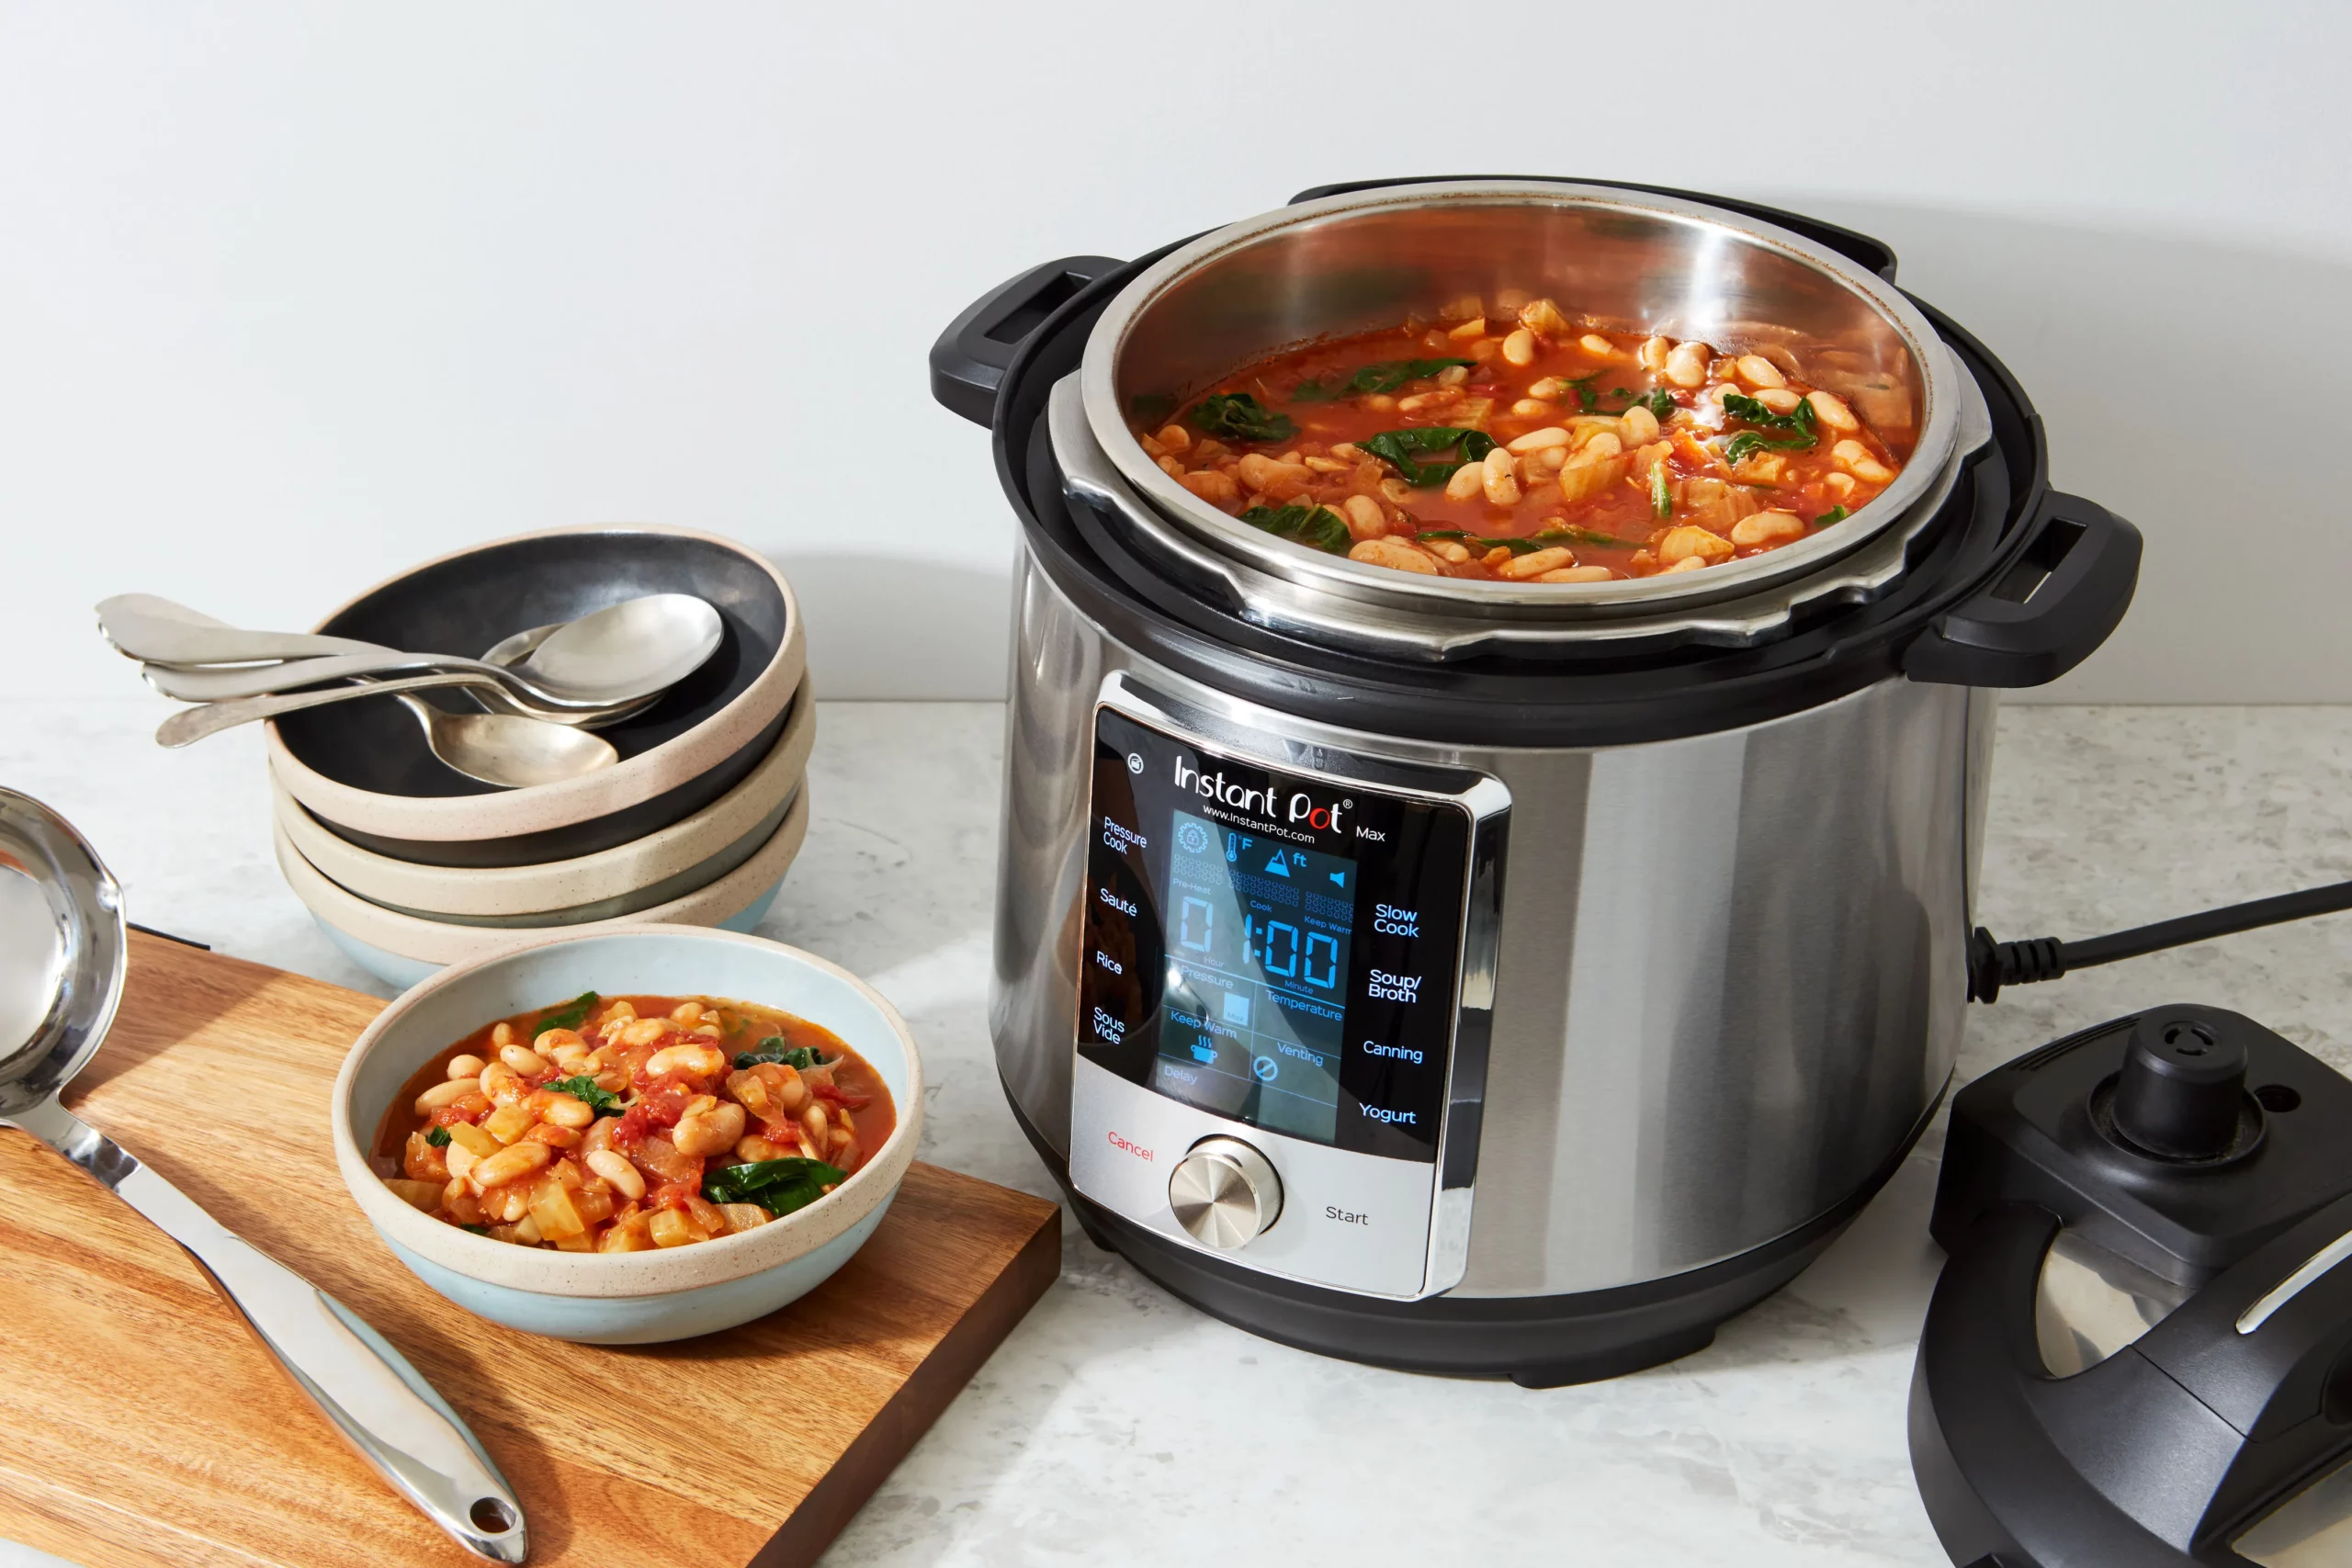 The pros and cons of cooking food in a pressure cooker